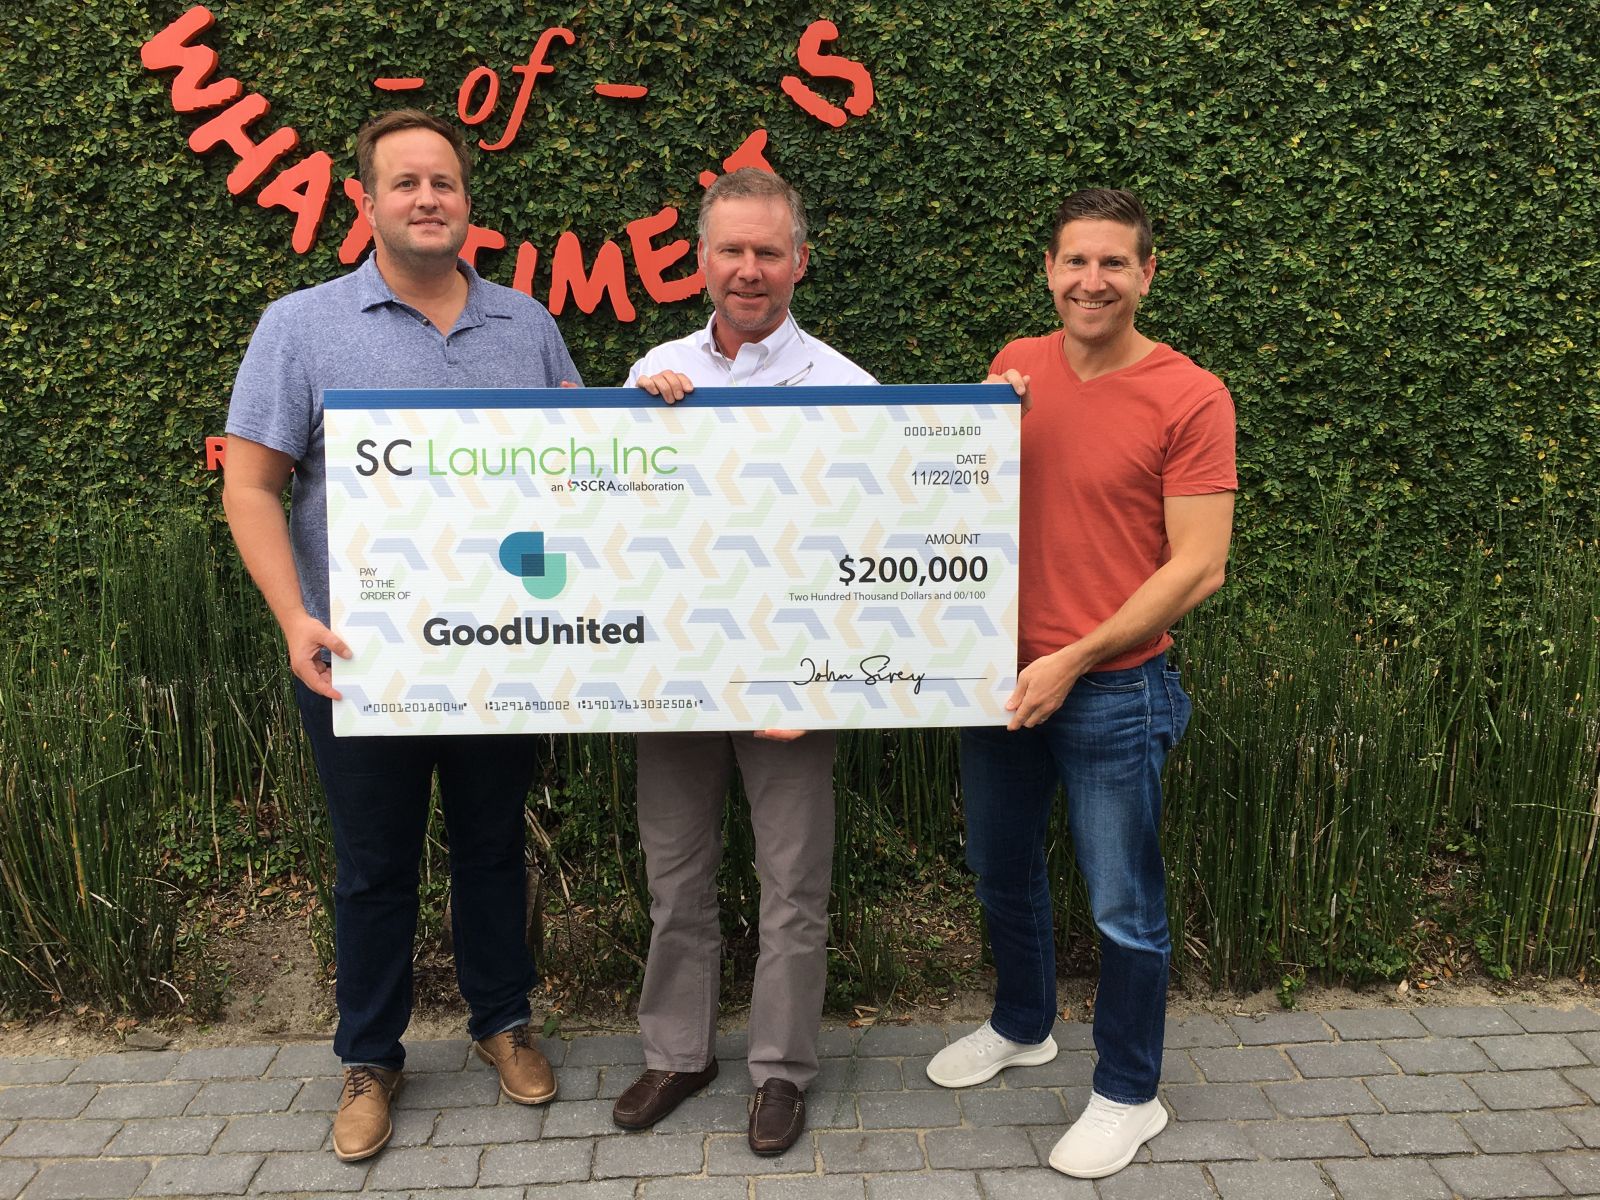 GoodUnited CEO Nick Black (from left), SCRA Investment Manager Derek Willis and GoodUnited President Jeremy Berman pass the ceremonial big check for the SC Launch investment in the startup. (Photo/Provided)